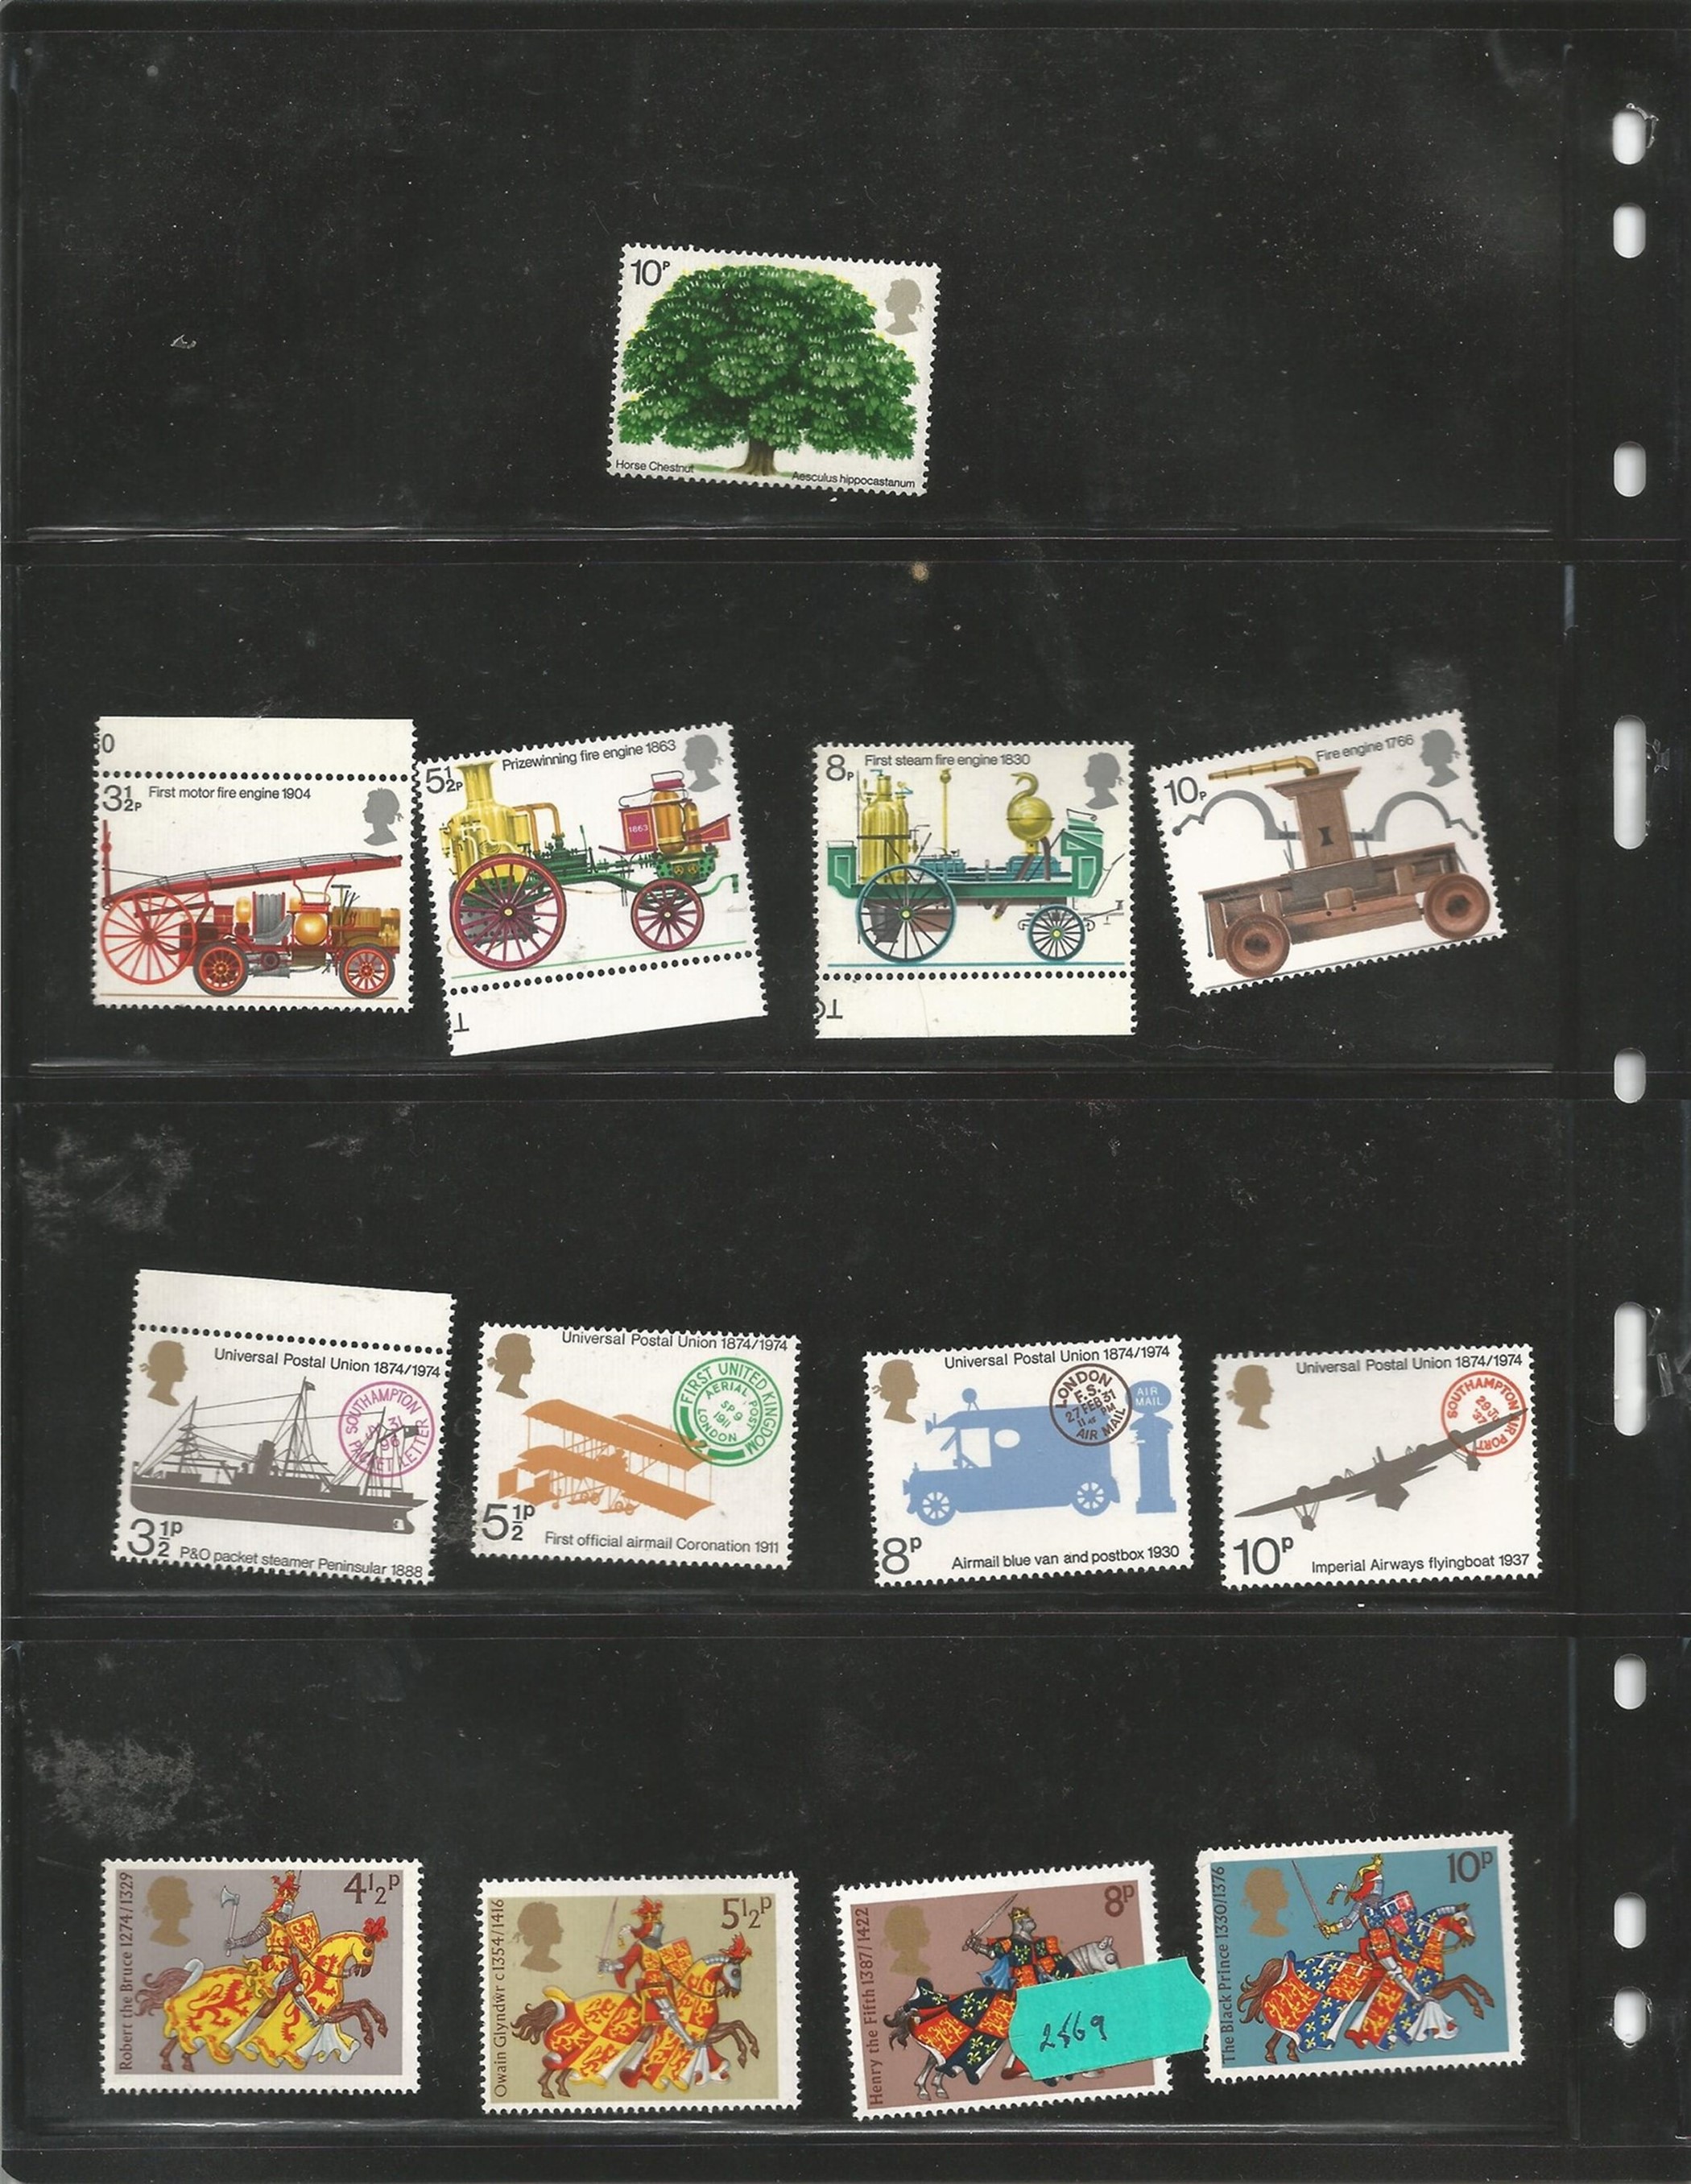 GB Mint Stamps Complete Commemorative Stamp Collection from E. F. T. A. 1967 up to Christmas 1974, - Image 2 of 3